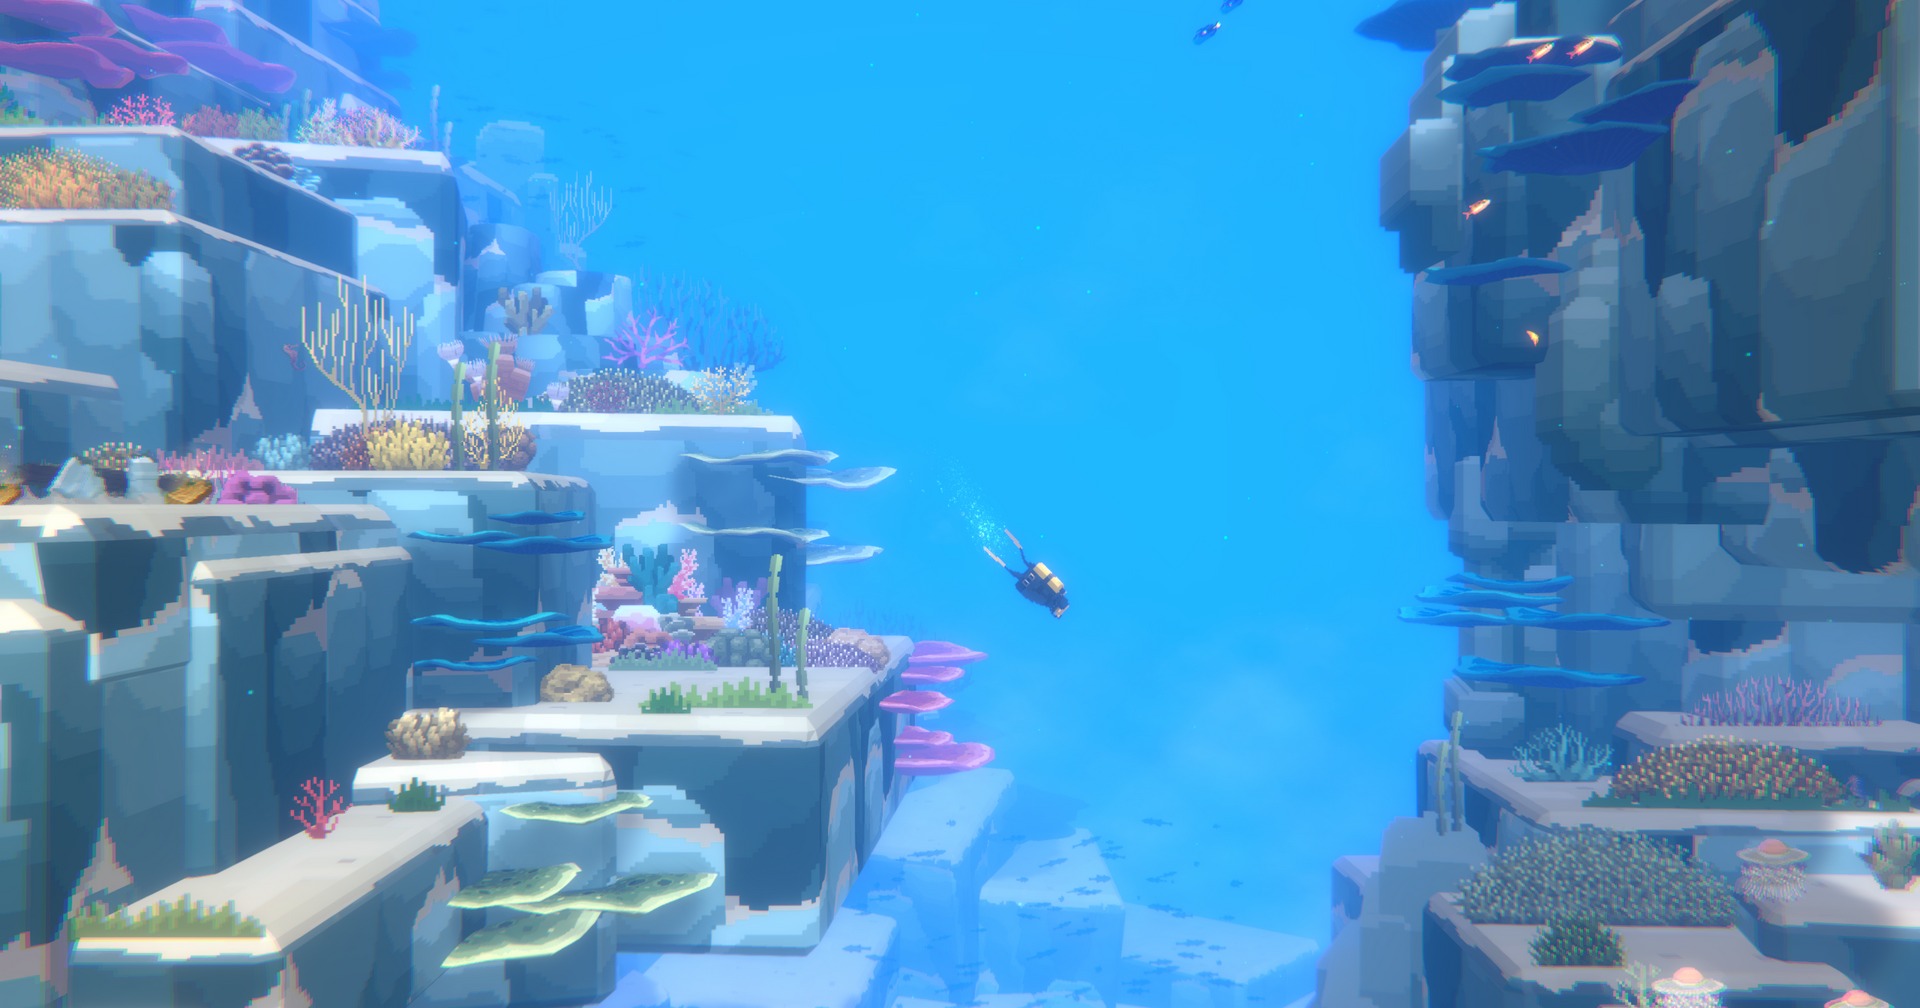 The gameplay in Dave the Diver is not only underwater. Here we see the hero diving through the sea. Learn more in our review.